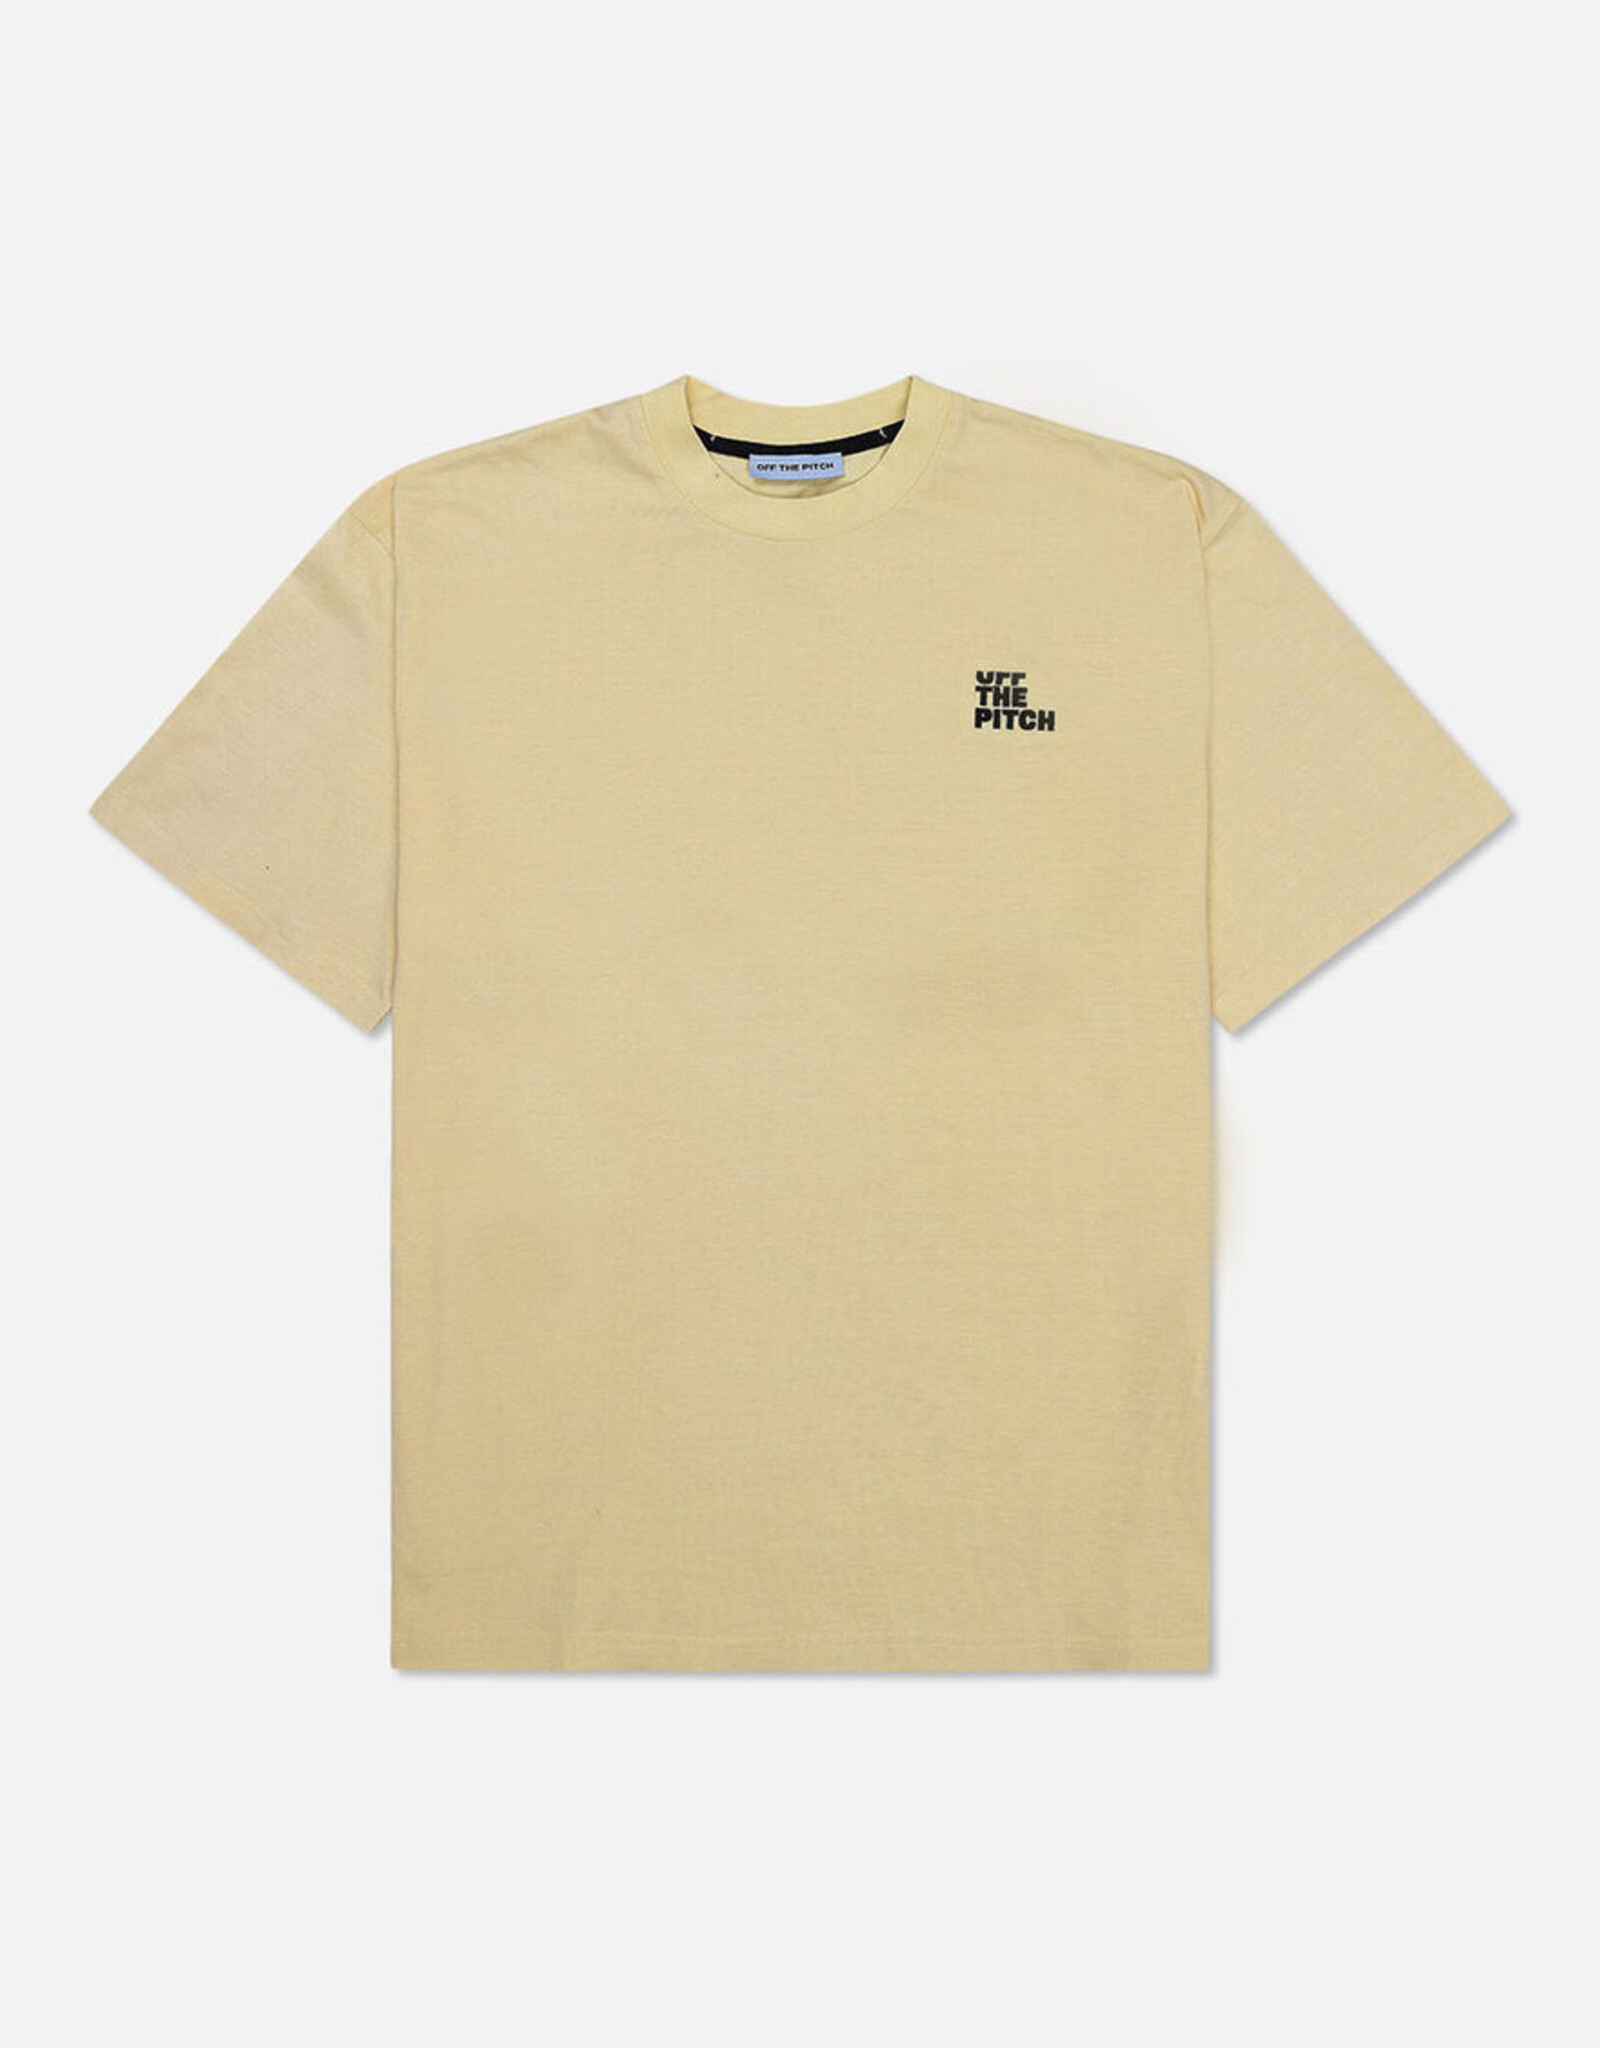 Off the pitch Loose Fit Pitch Tee